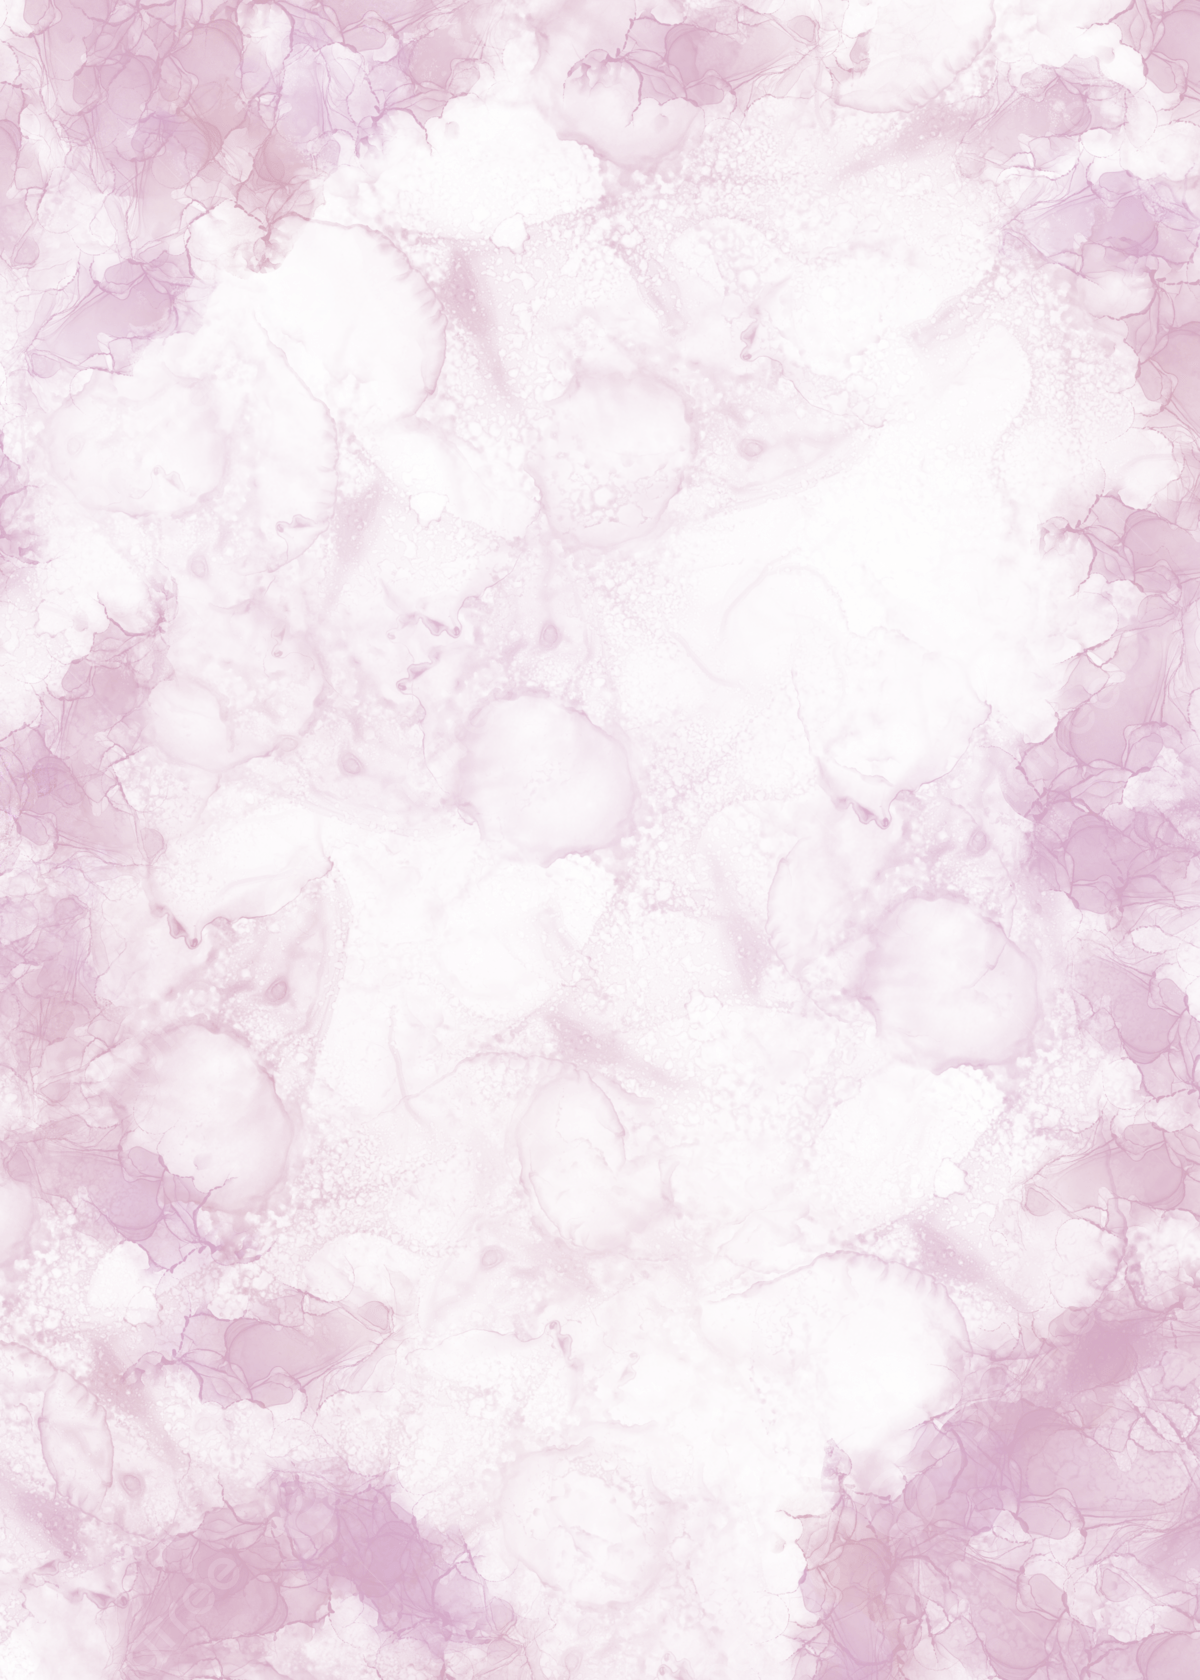 A pink and white watercolor background with a border - Pastel purple